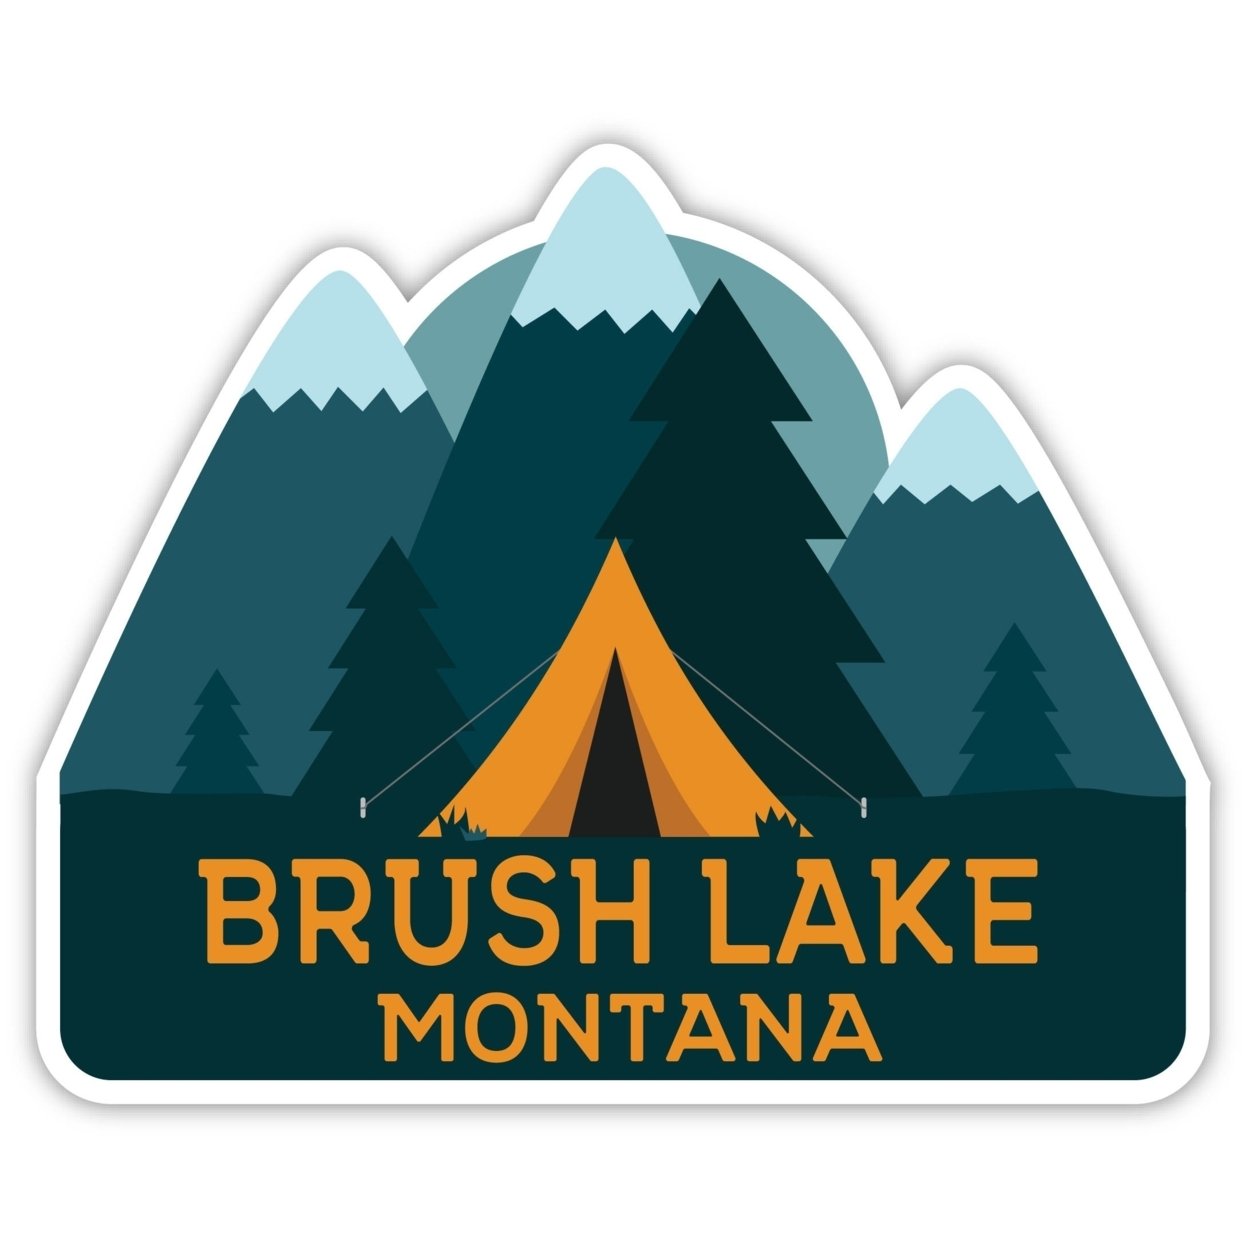 Brush Lake Montana Souvenir Decorative Stickers (Choose Theme And Size) - 4-Pack, 8-Inch, Tent